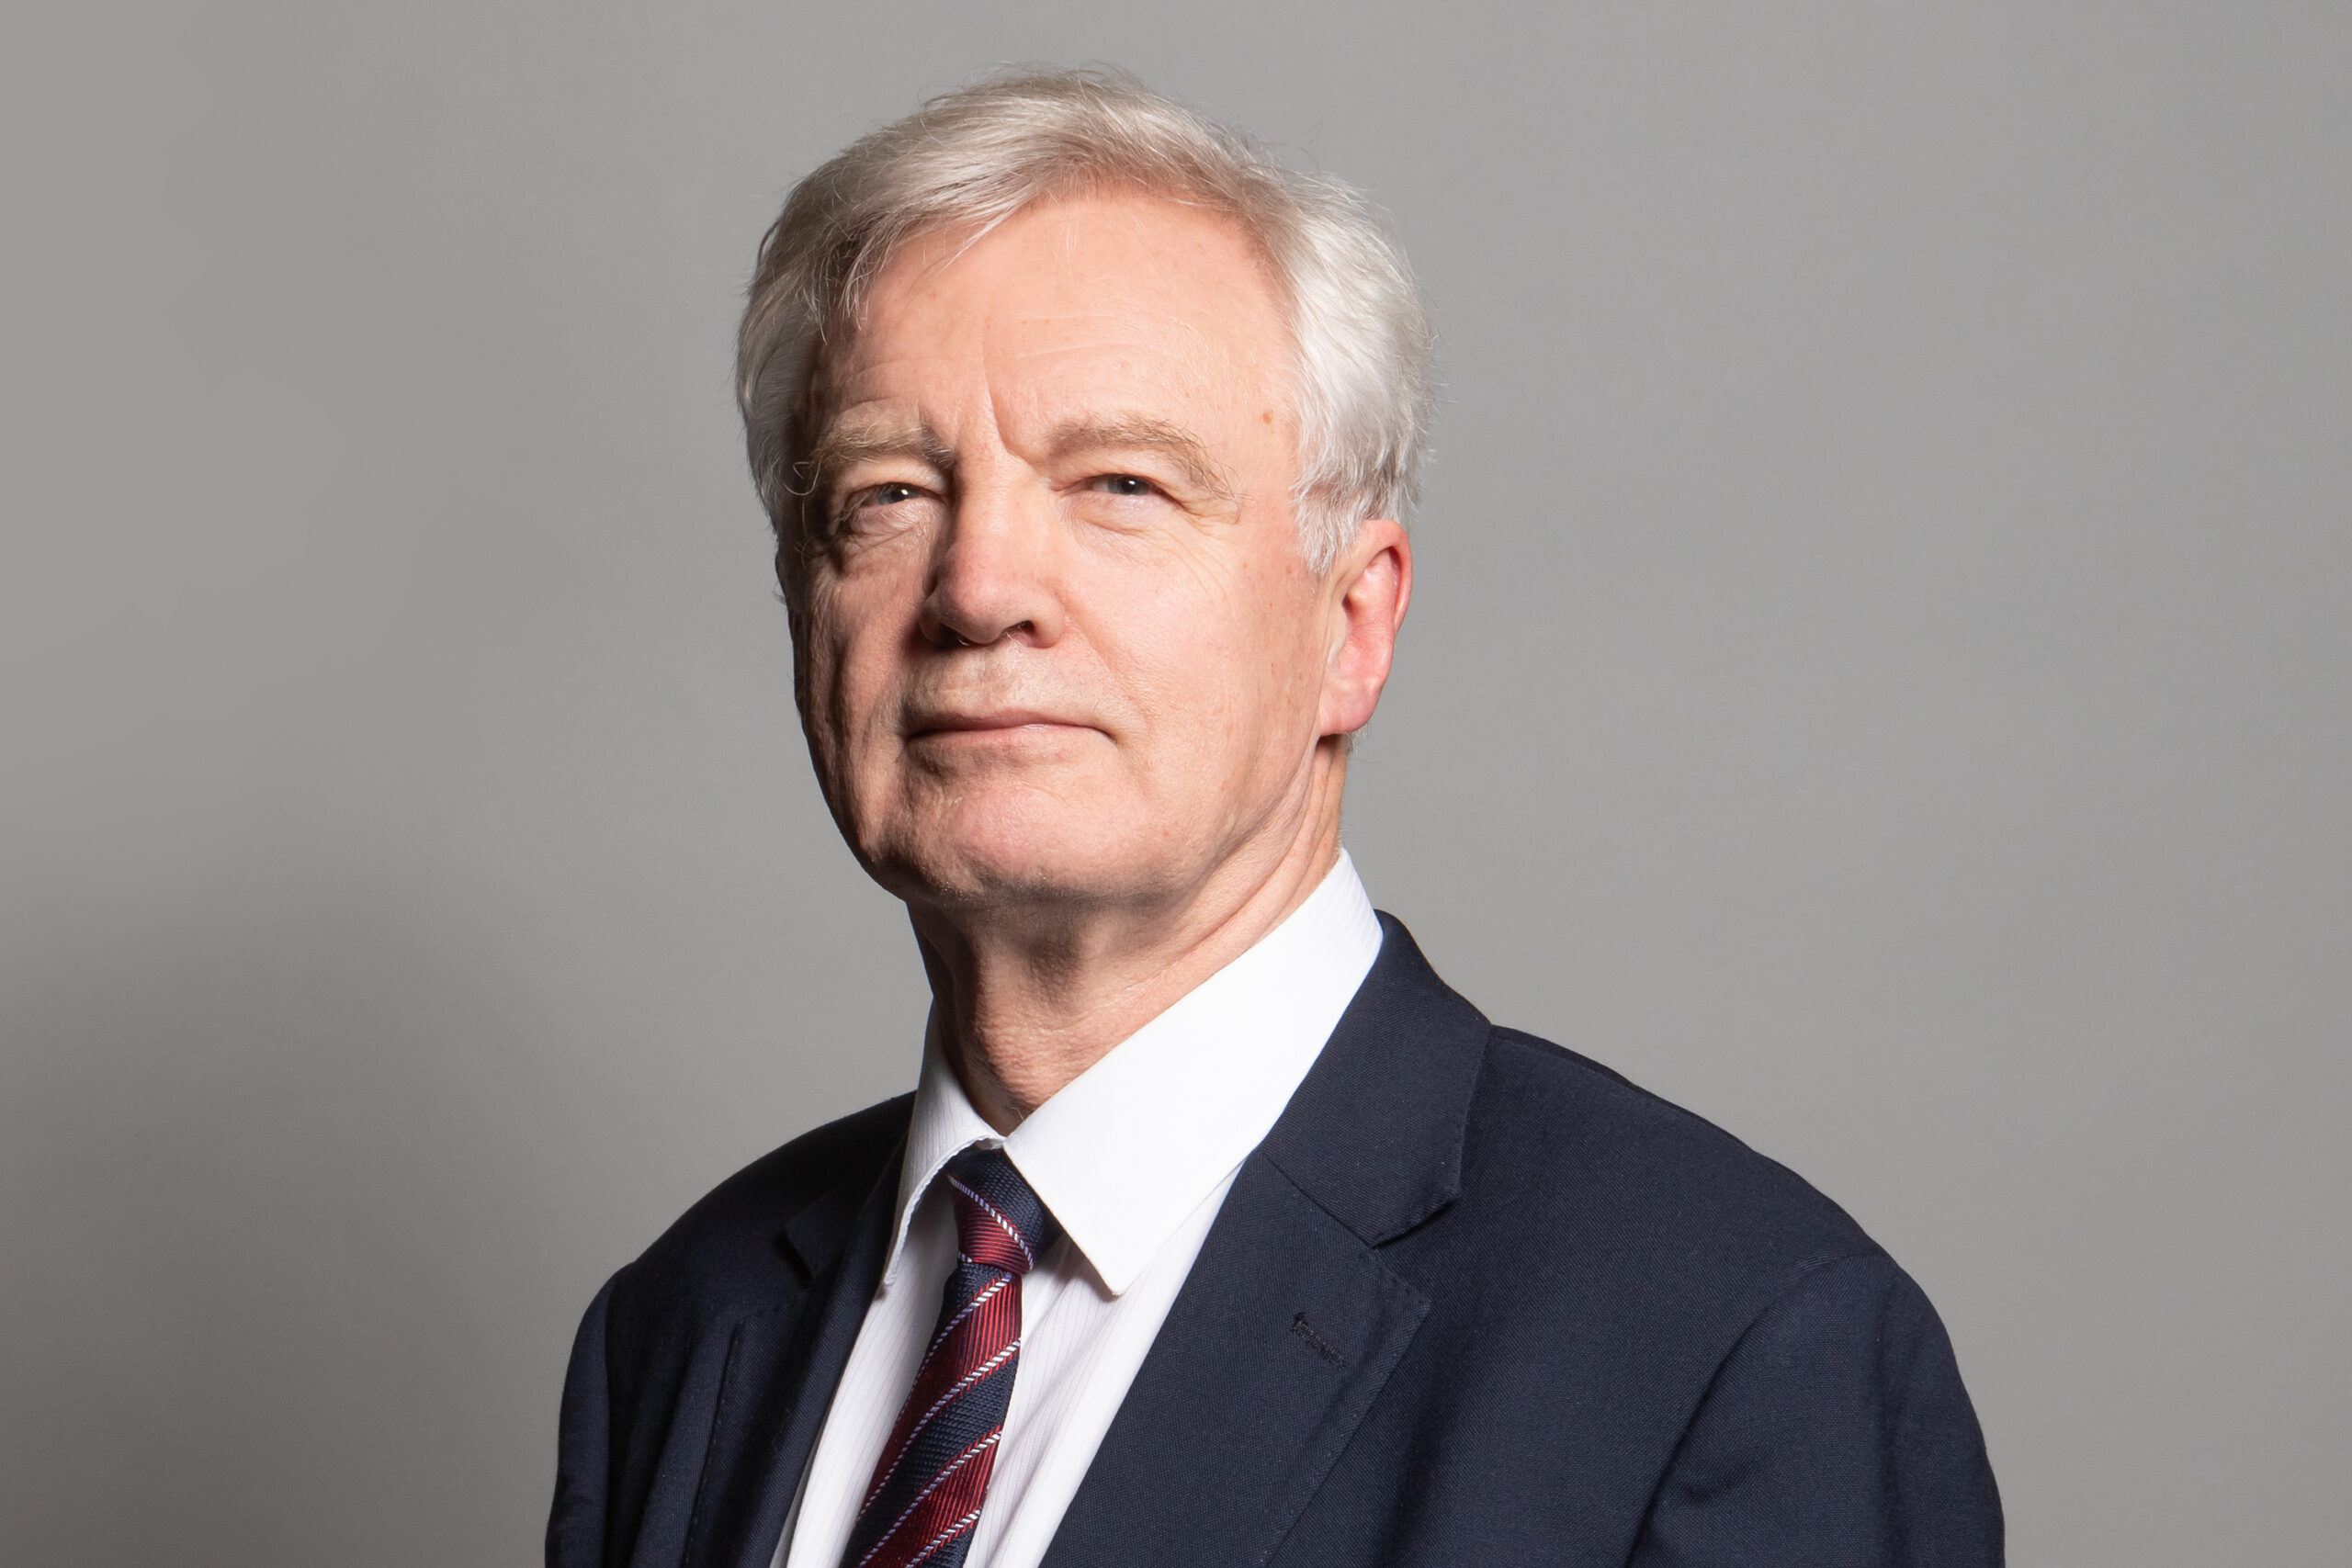 Former Brexit Secretary David Davis said the incident showed the Home Office may not be 'fit for purpose'. Picture: UK Parliament